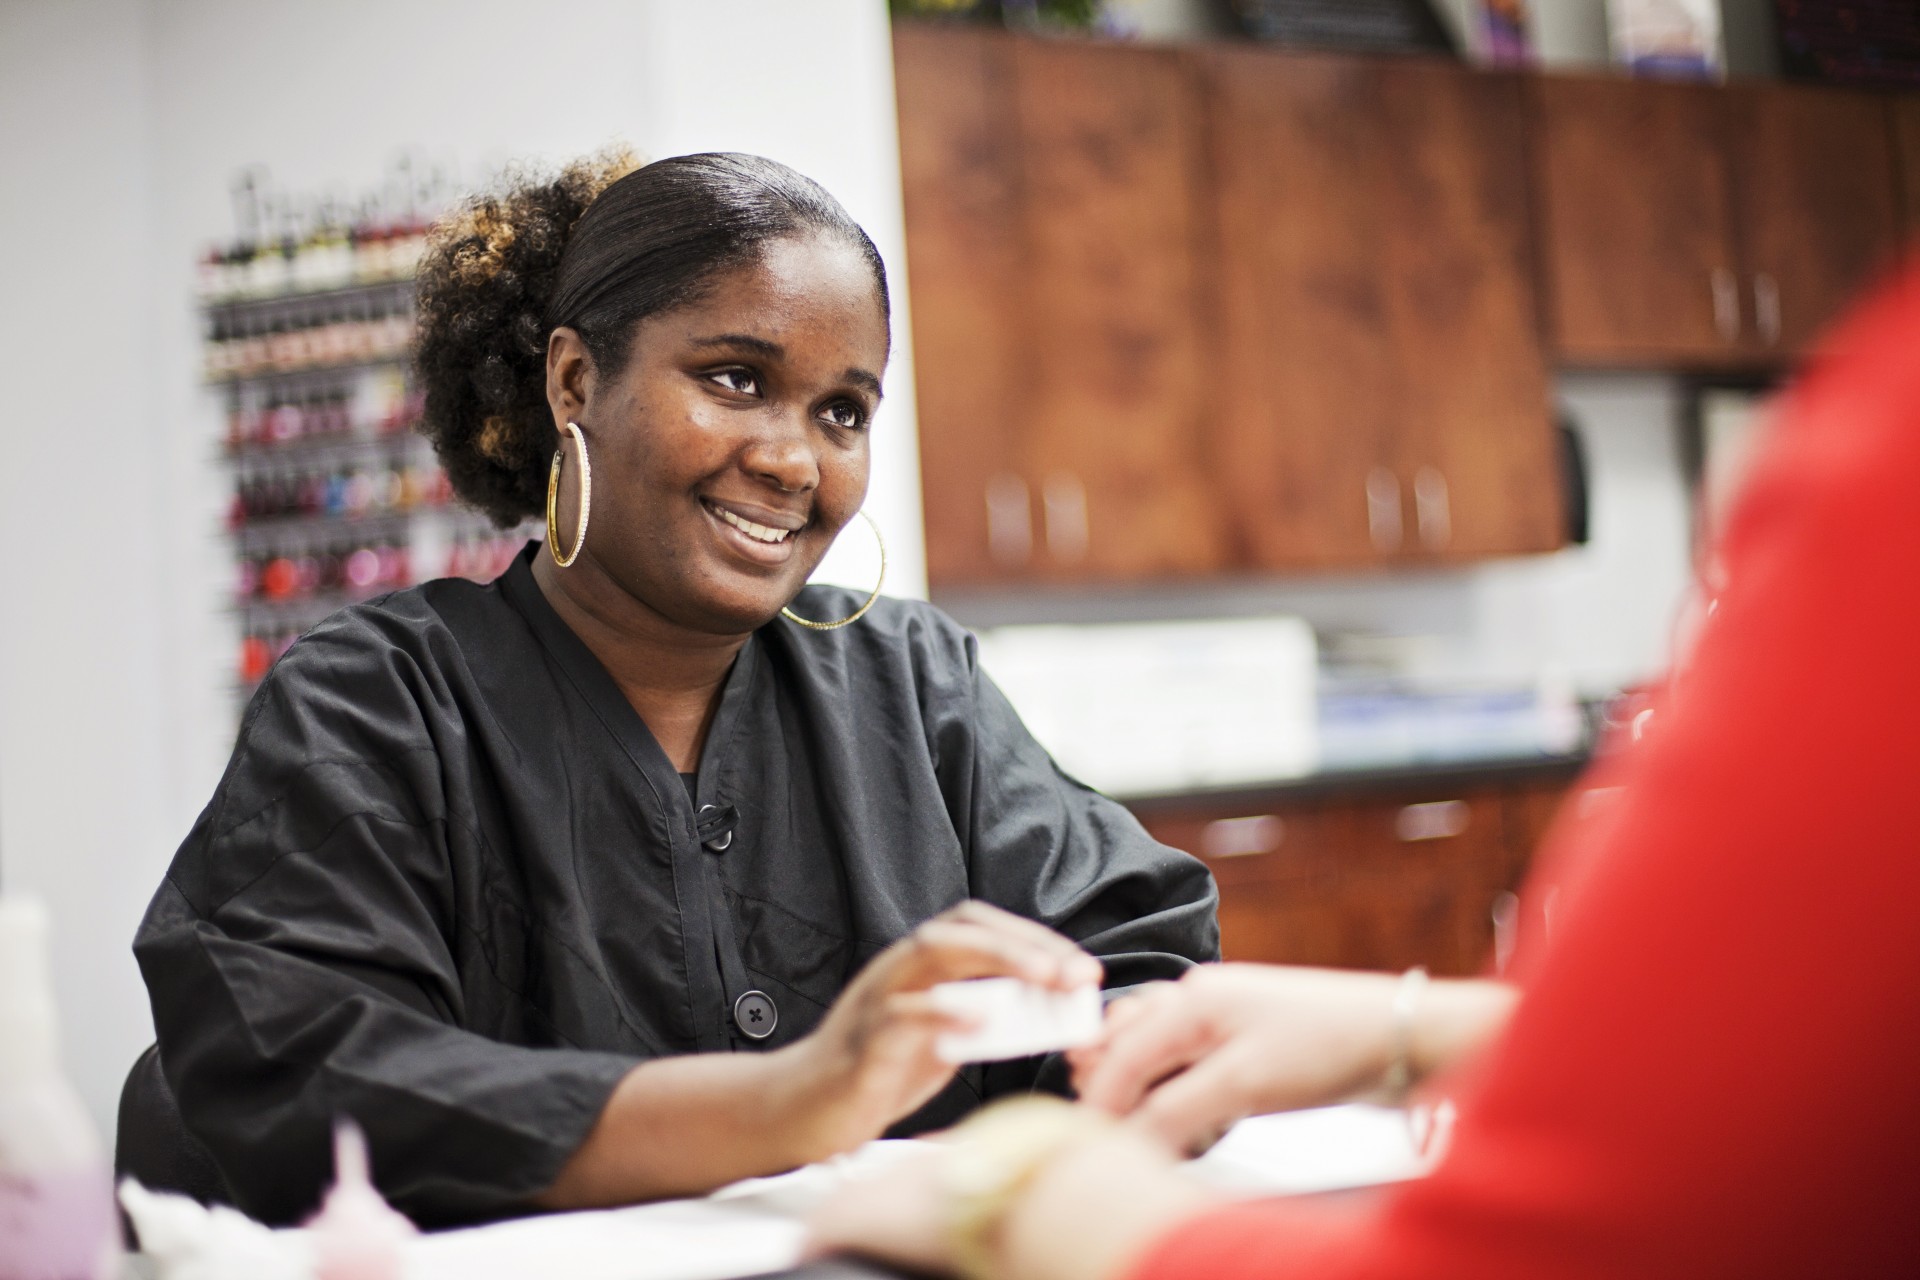 Learn more about Cosmetology Program offered at many SRTC locations